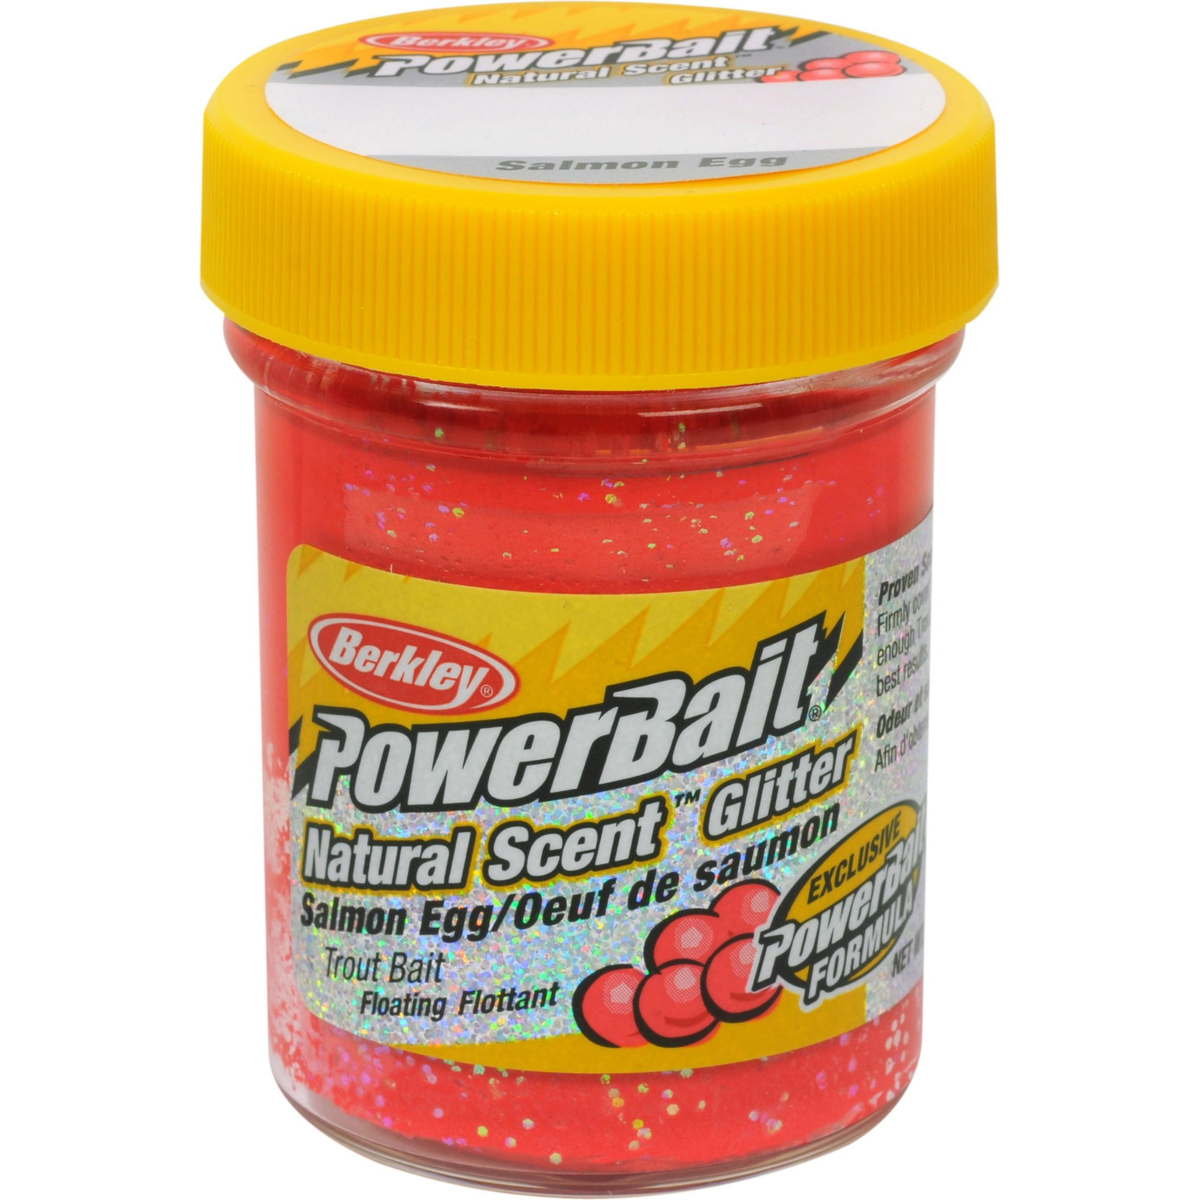 Photo of Berkley PowerBait Natural Glitter Trout Bait, Salmon Egg Scent for sale at United Tackle Shops.